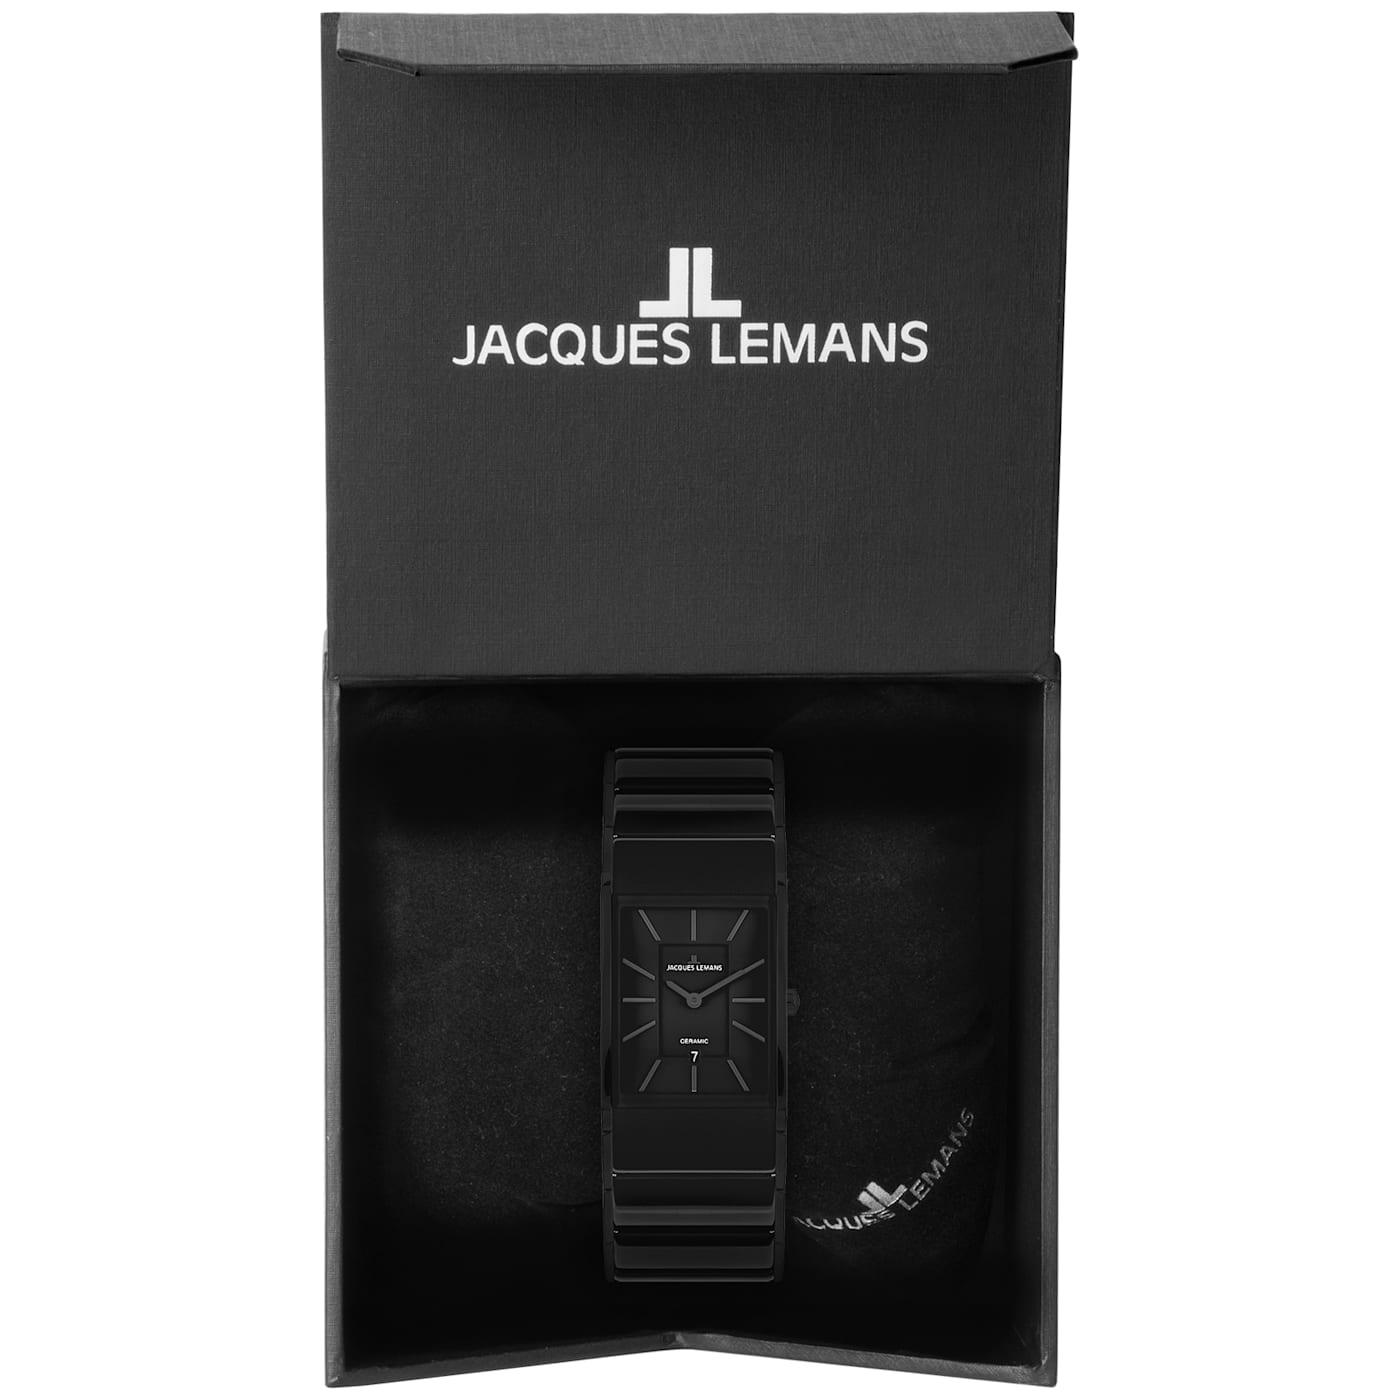 JACQUES LEMANS Dublin Men's Watch with High-Tech Ceramic Strap, Stainless  Steel IP-Black, 1-1939 - 12CX7A